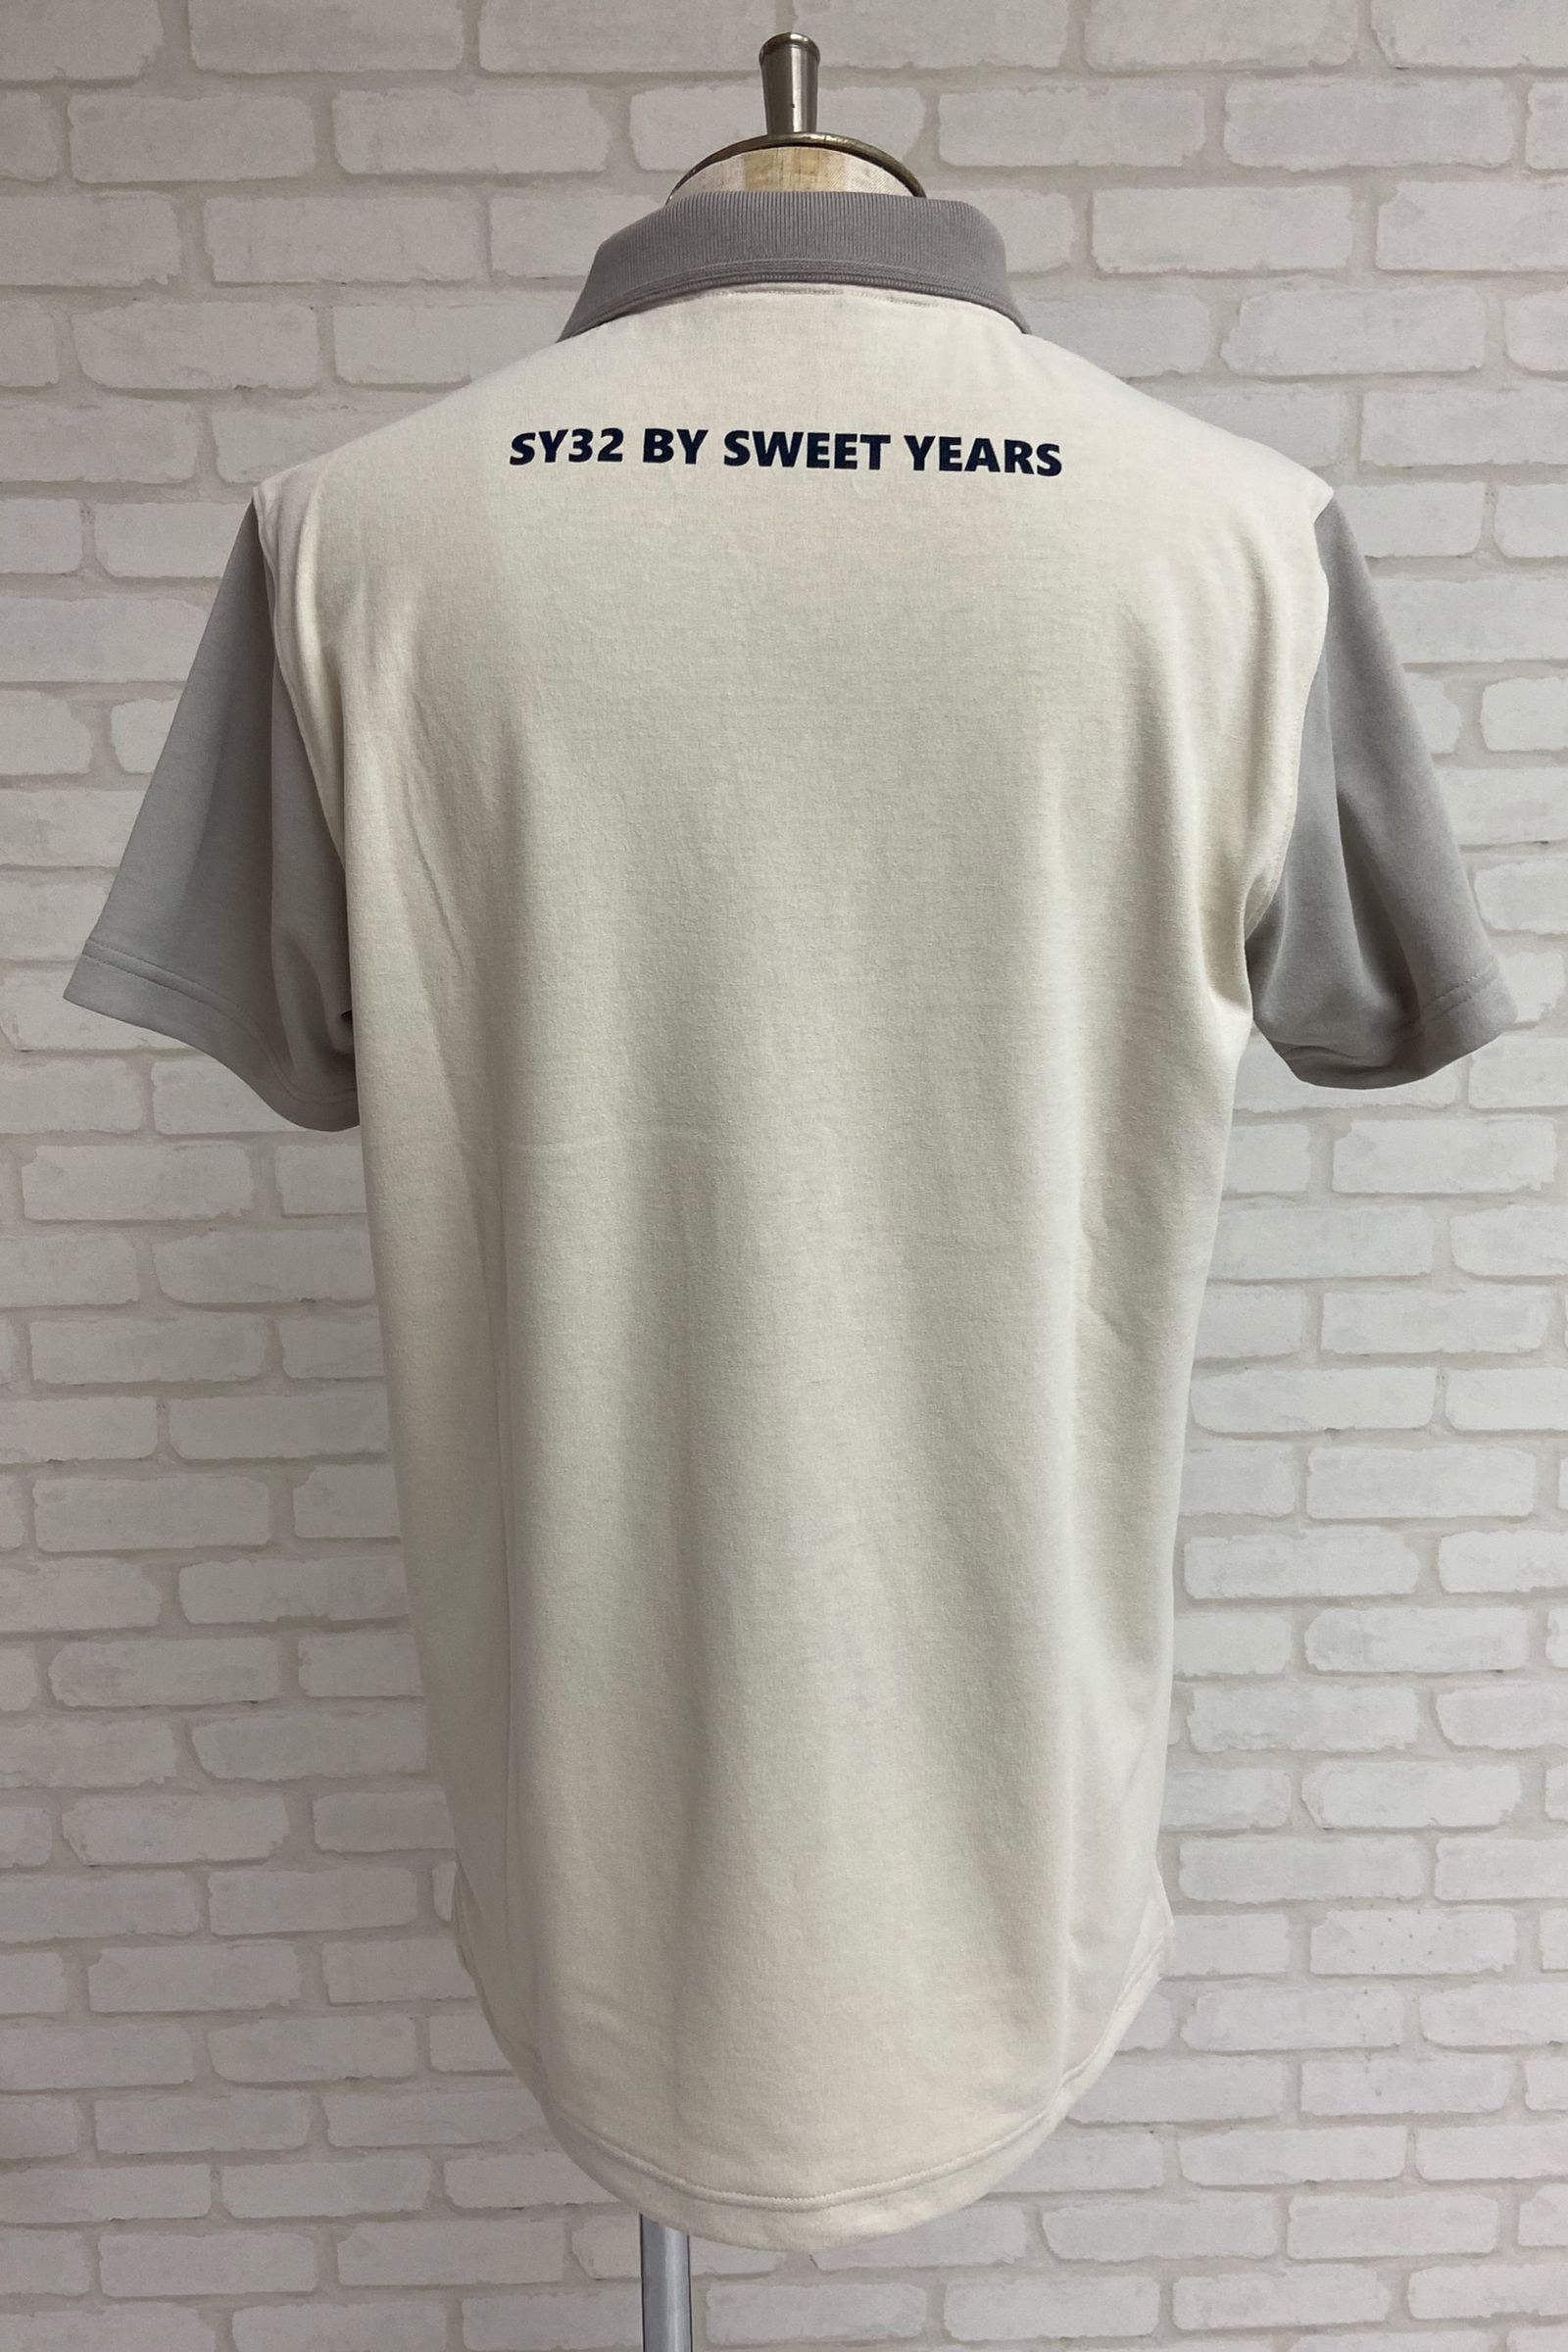 POLO SHIRTS 2 / GRAY×BEIGE 【SY32 by SWEET YEARS】 - S